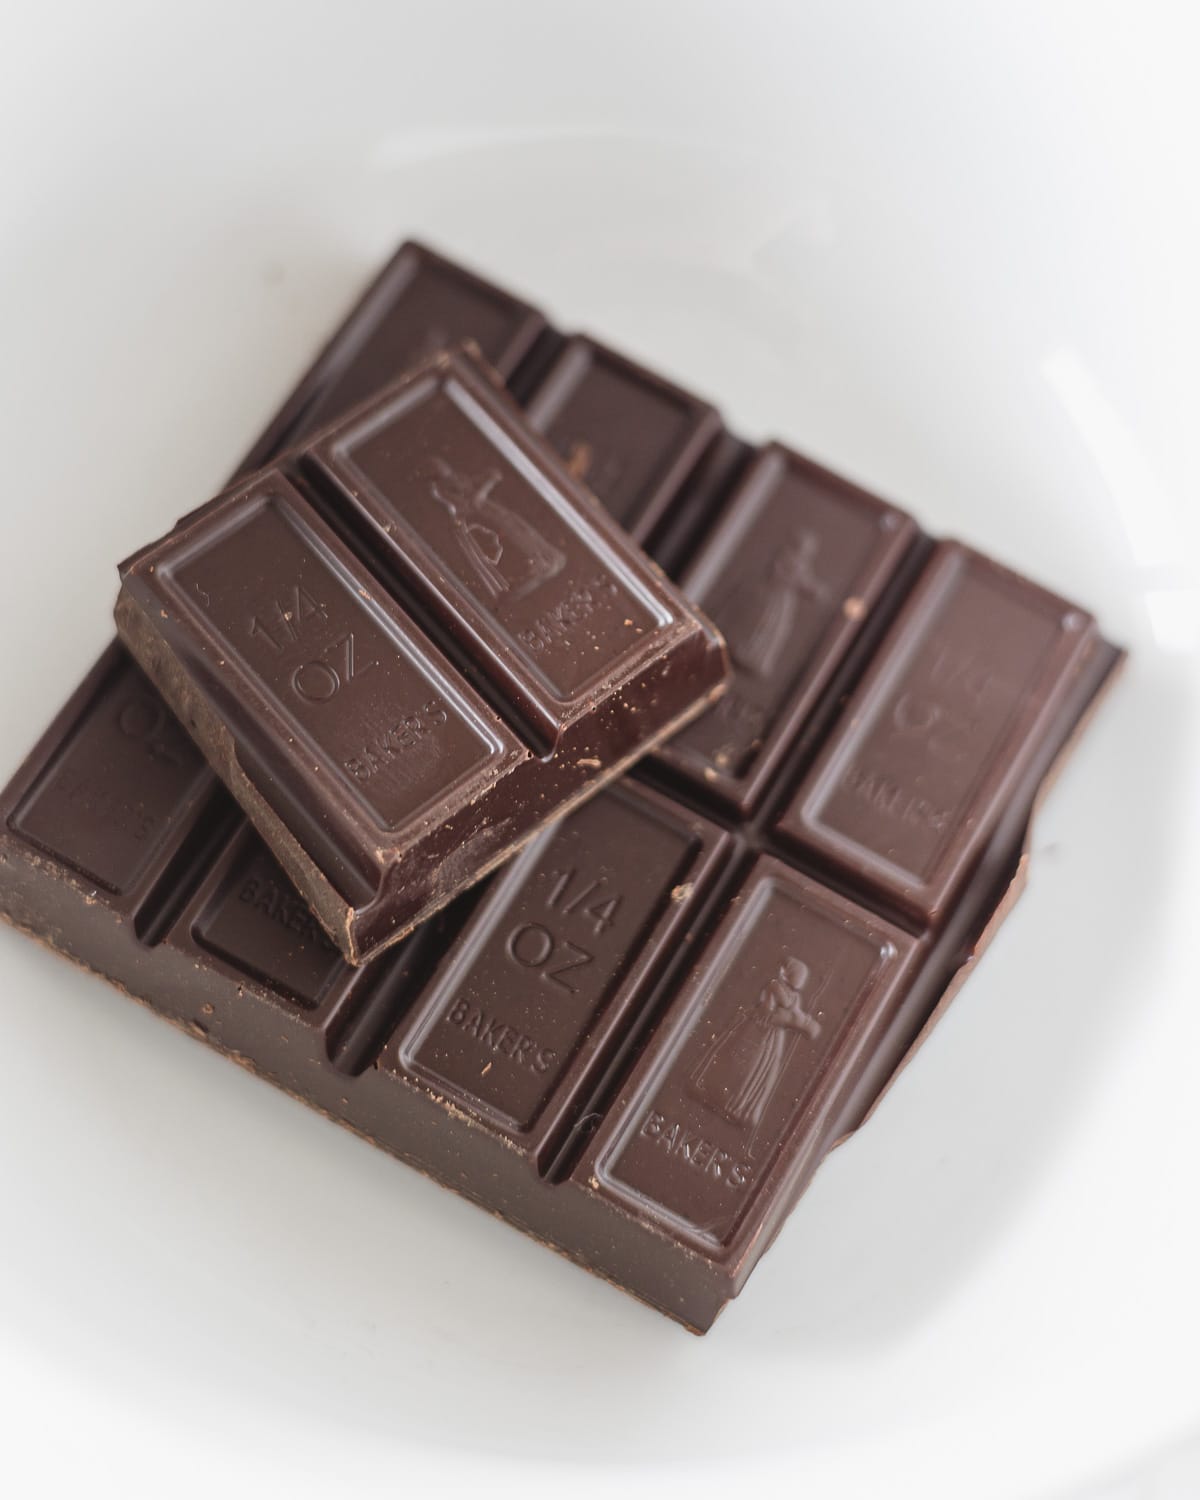 Squares of an unsweetened chocolate baking bar.